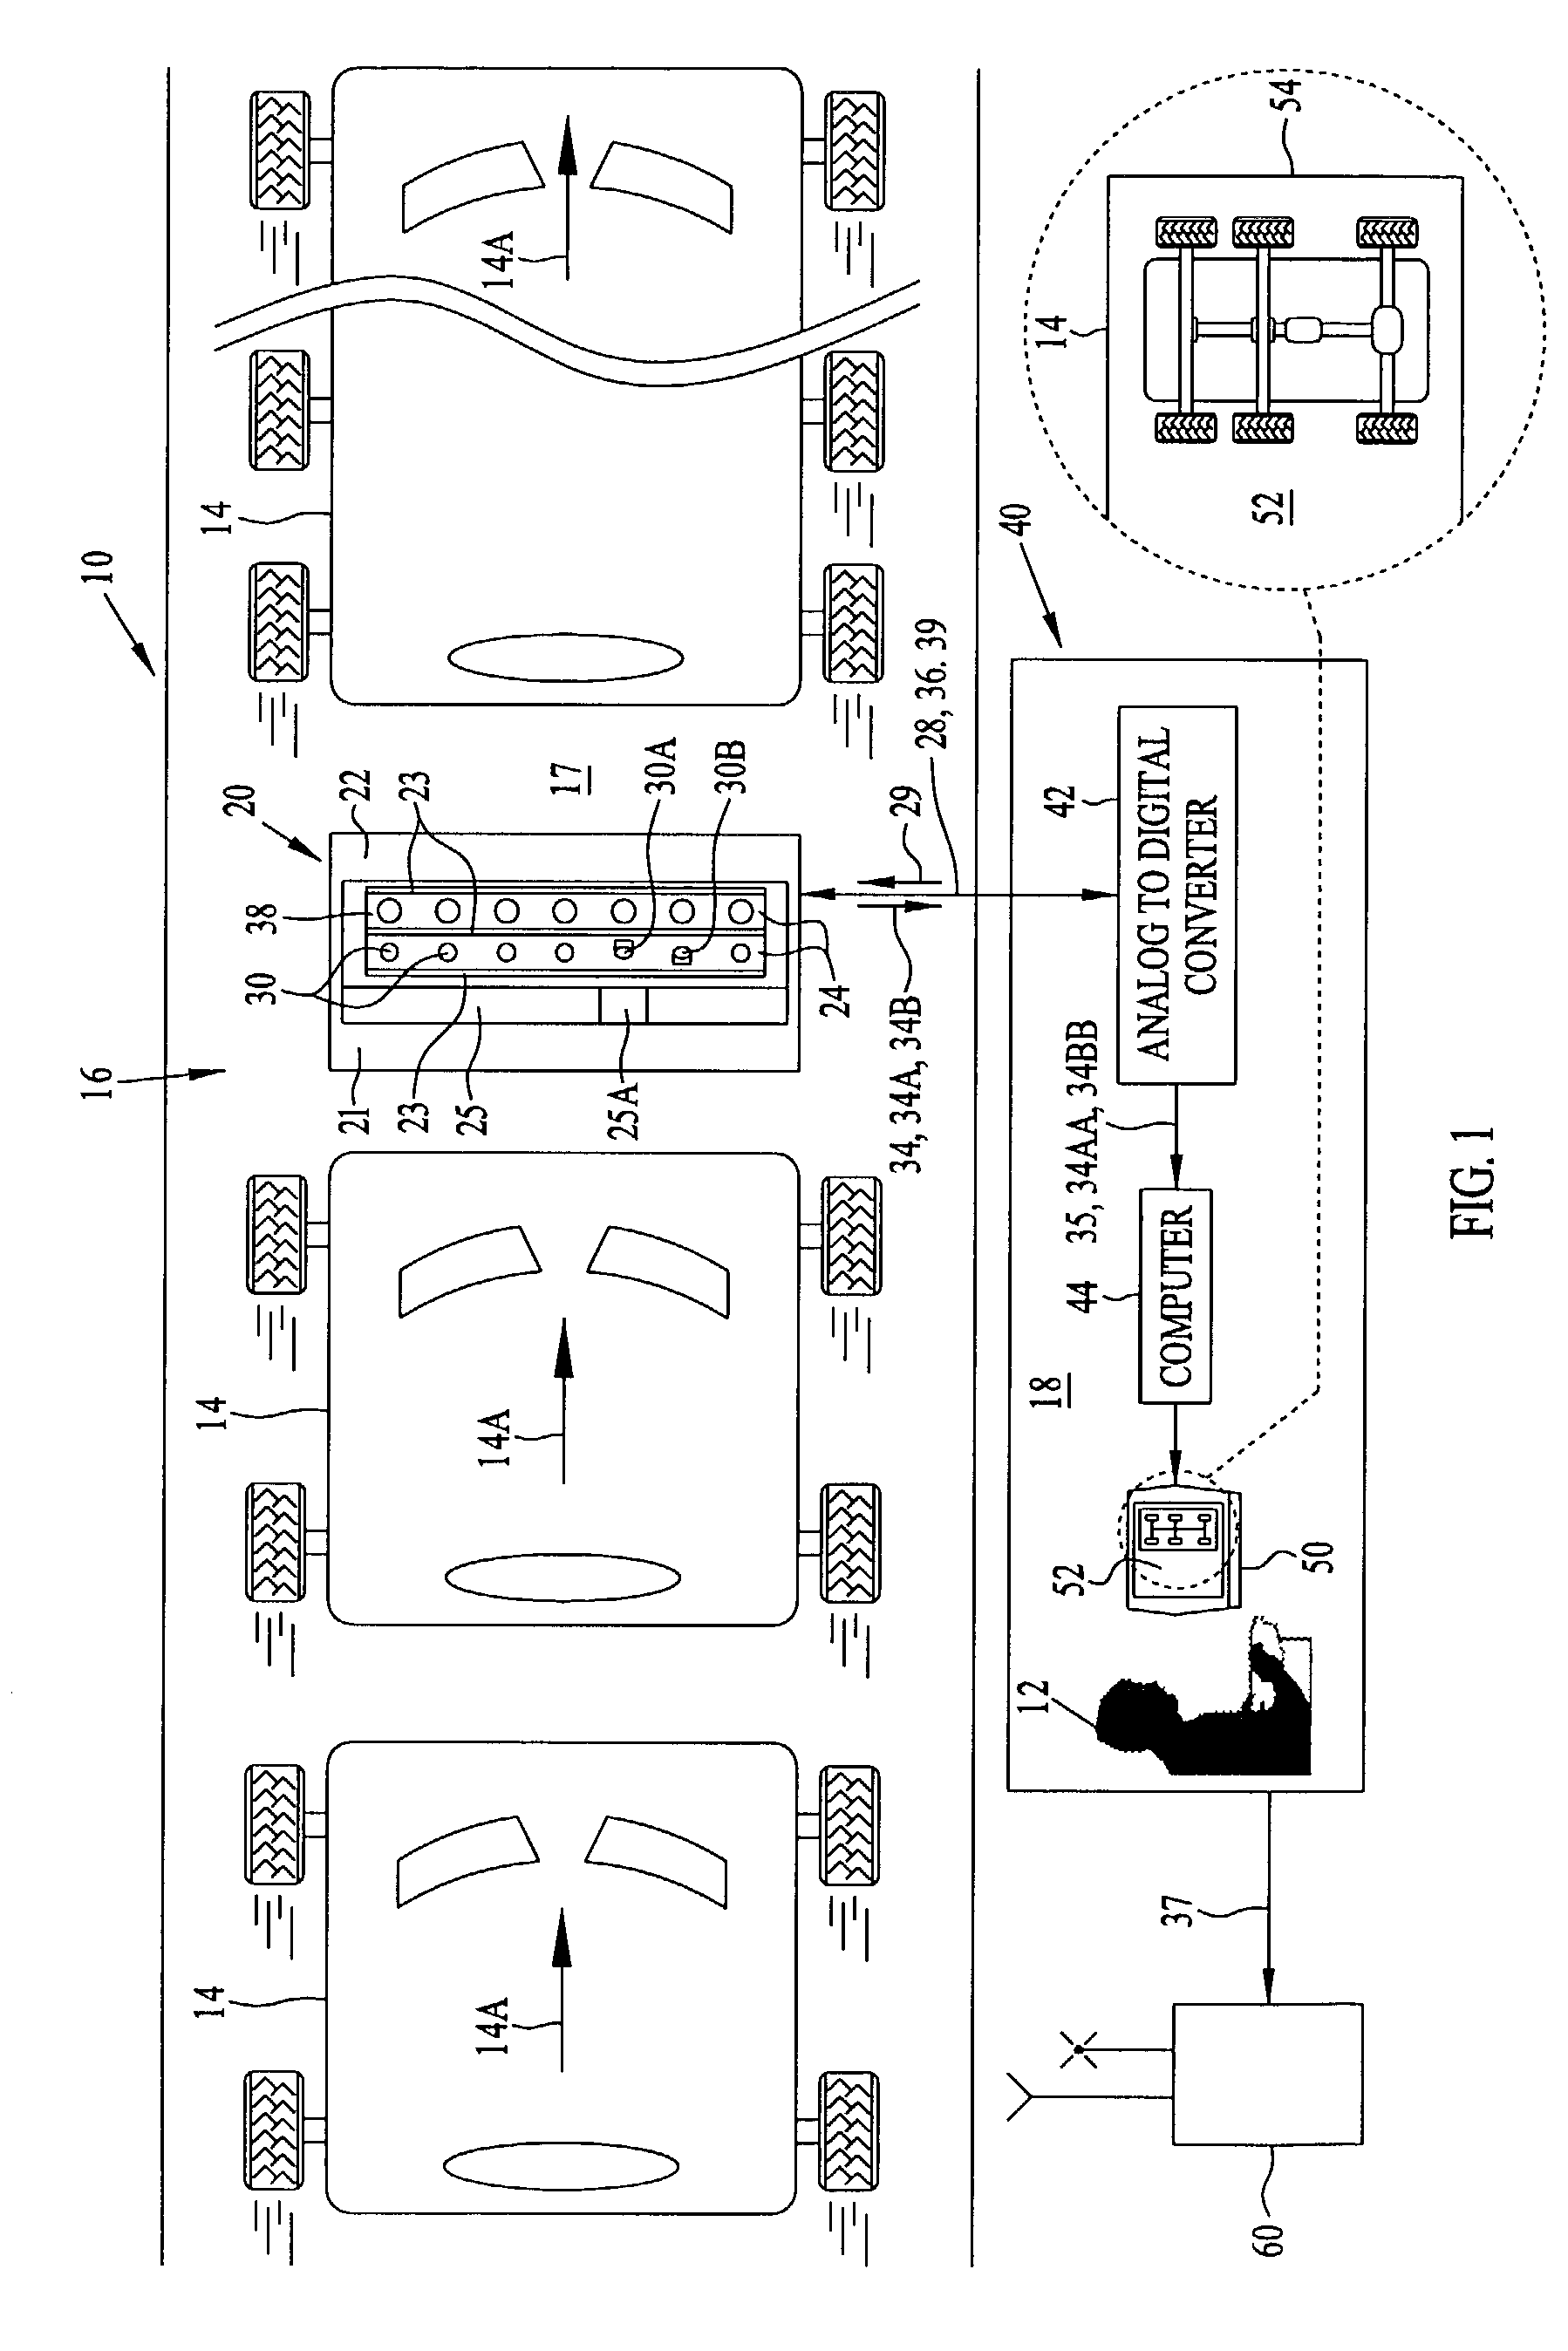 Vehicle underbody imaging system